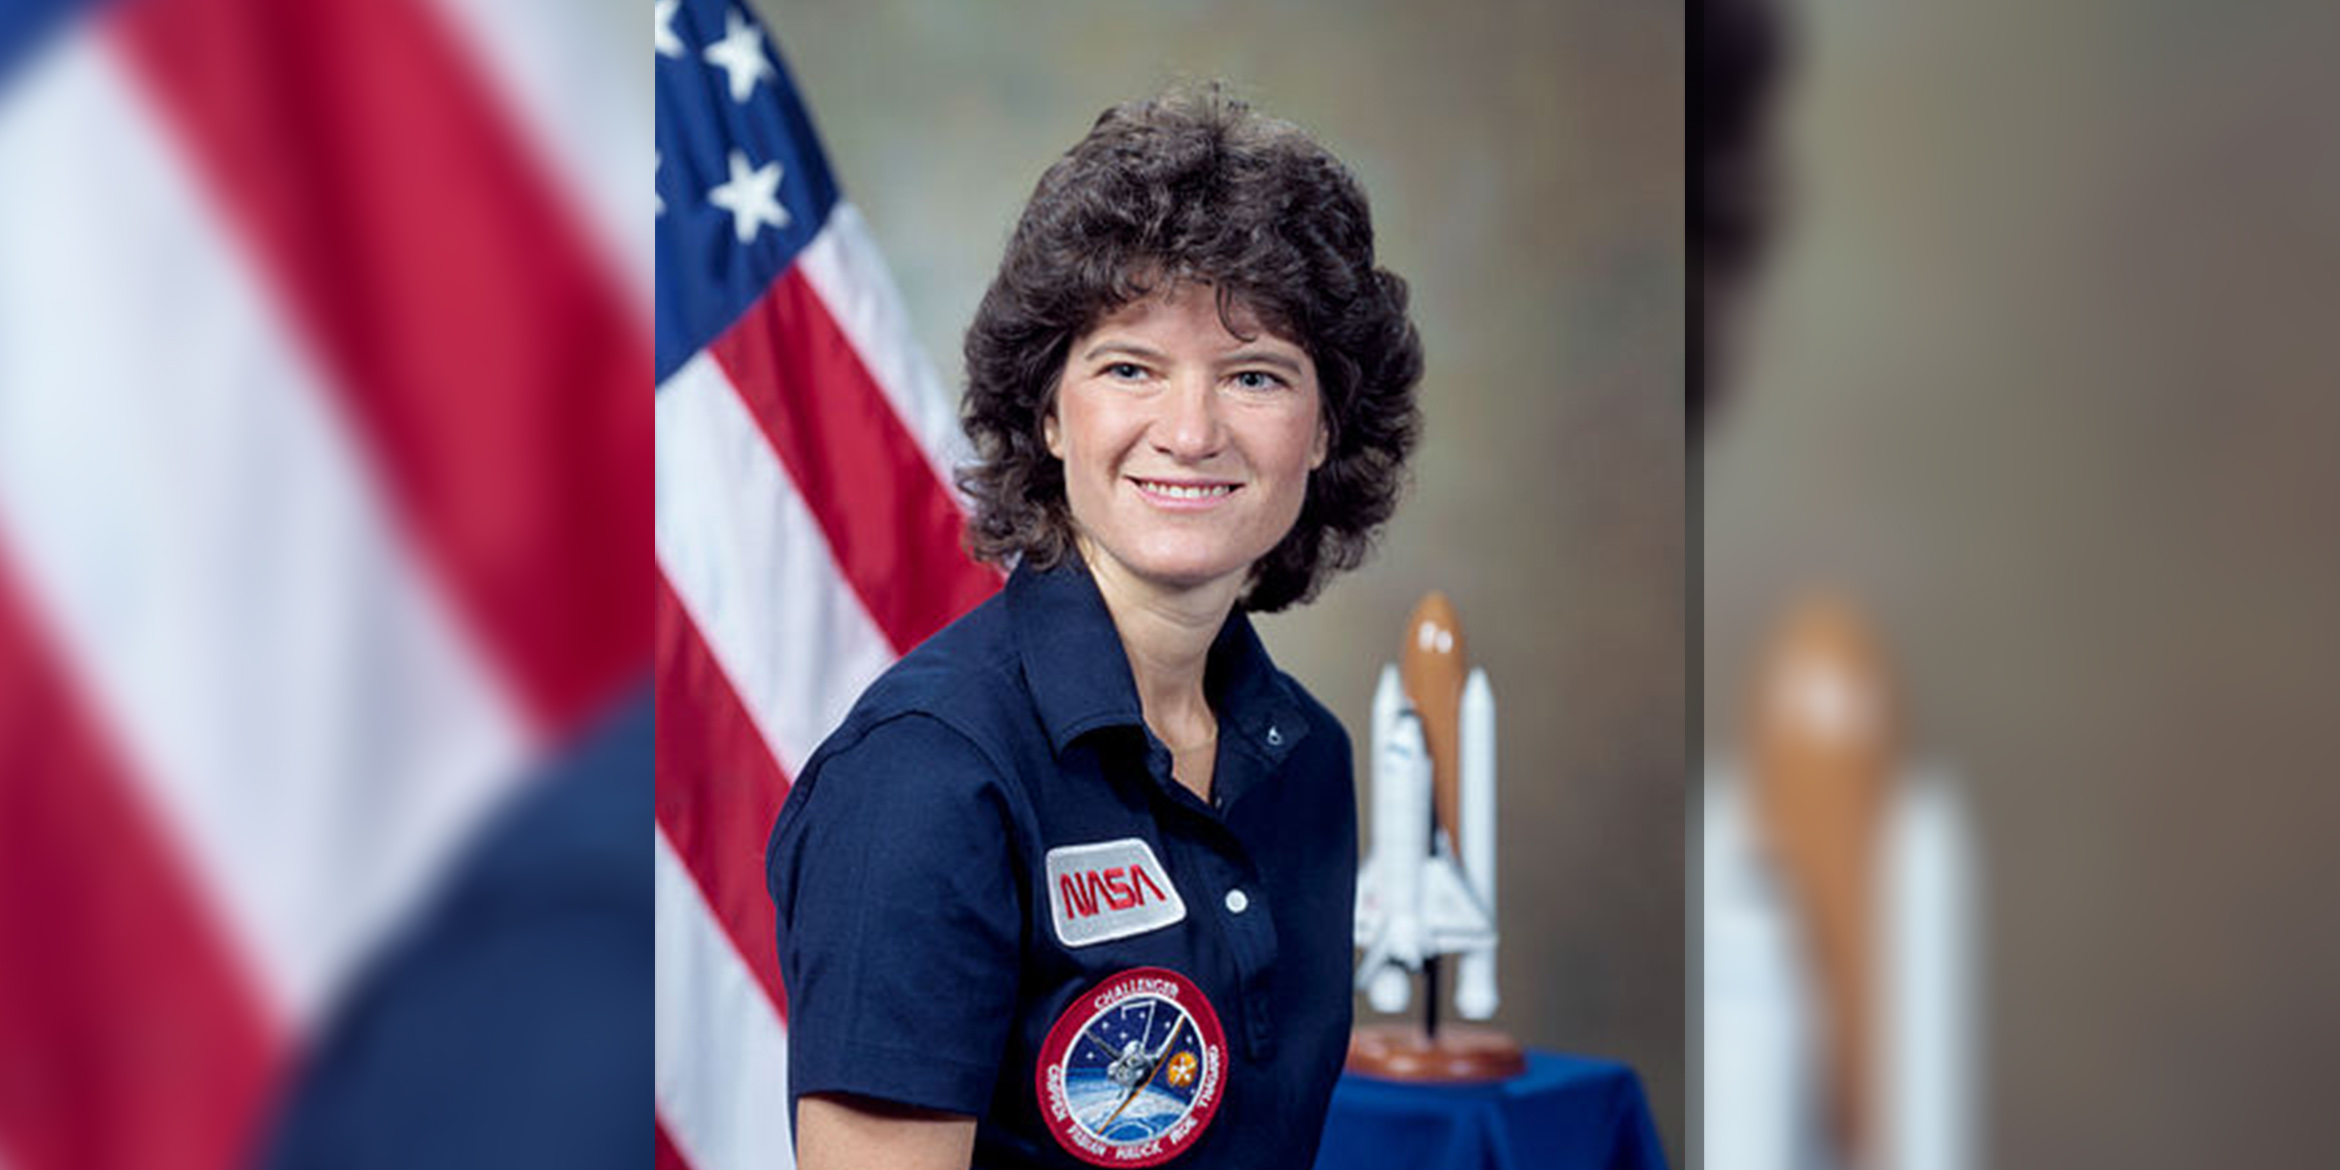 Featured image: A portrait of Sally Ride dressed in a blue NASA flight suit. - Read full post: Beyond Labels